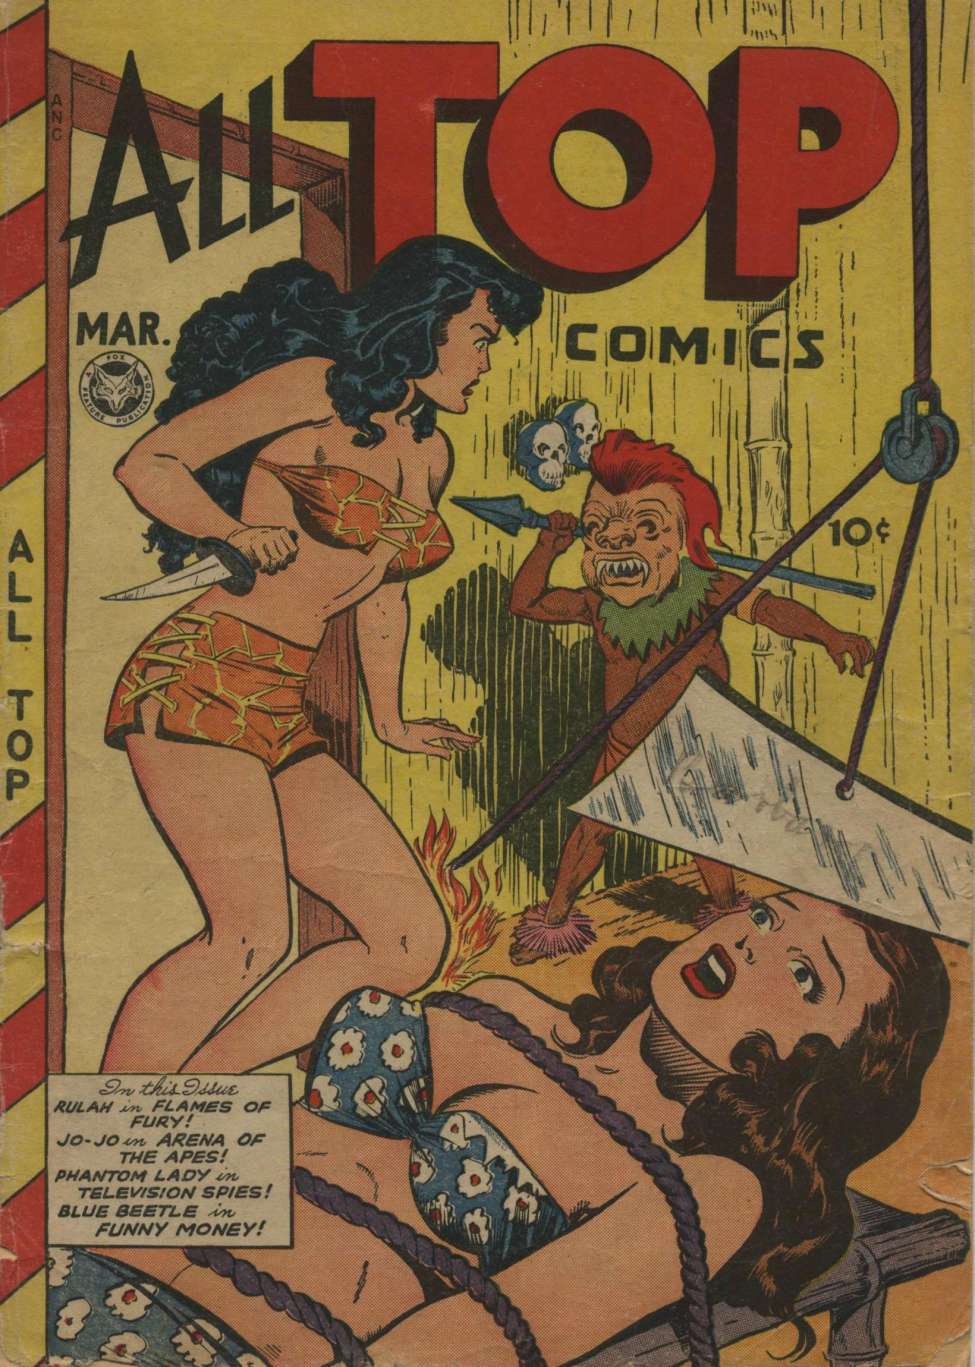 Comic Book Cover For All Top Comics 10